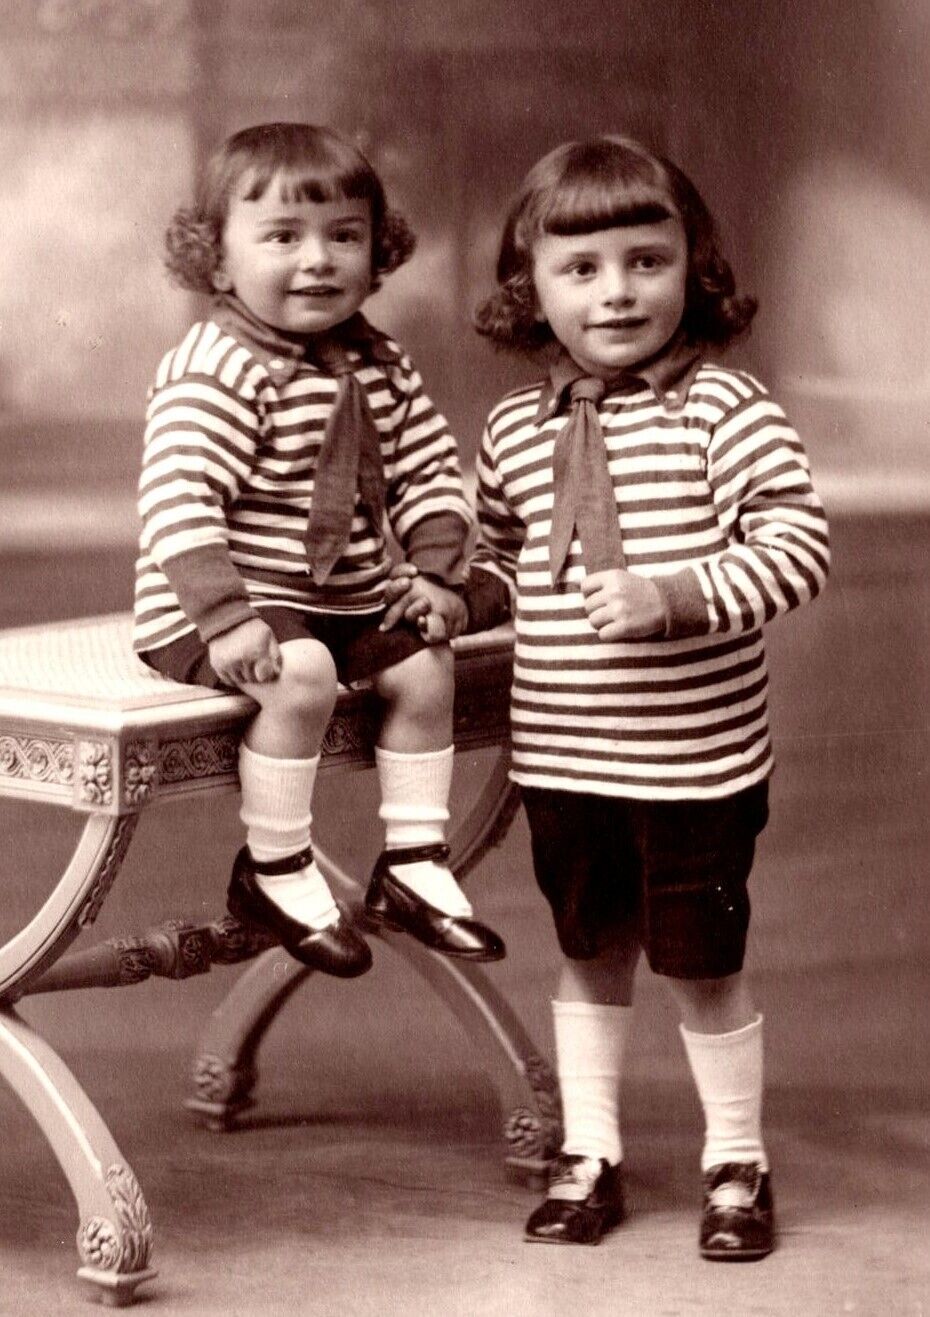 PORTRAIT OF TWO ADORABLE SIBLINGS : IDENTICALLY DRESSED : FASHION : RPPC